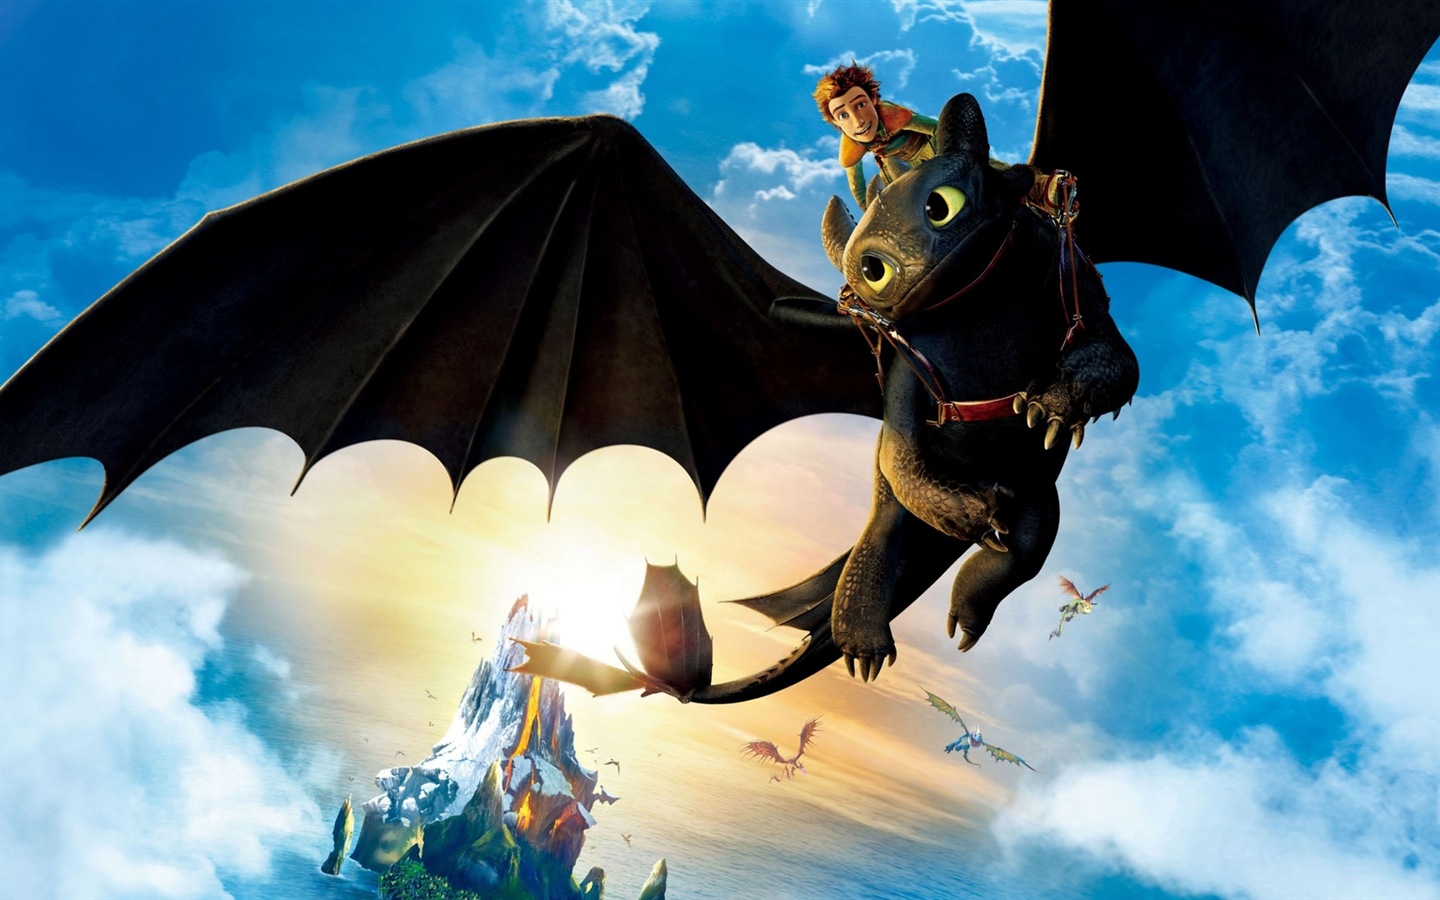 How to Train Your Dragon 2 HD wallpapers #1 - 1440x900